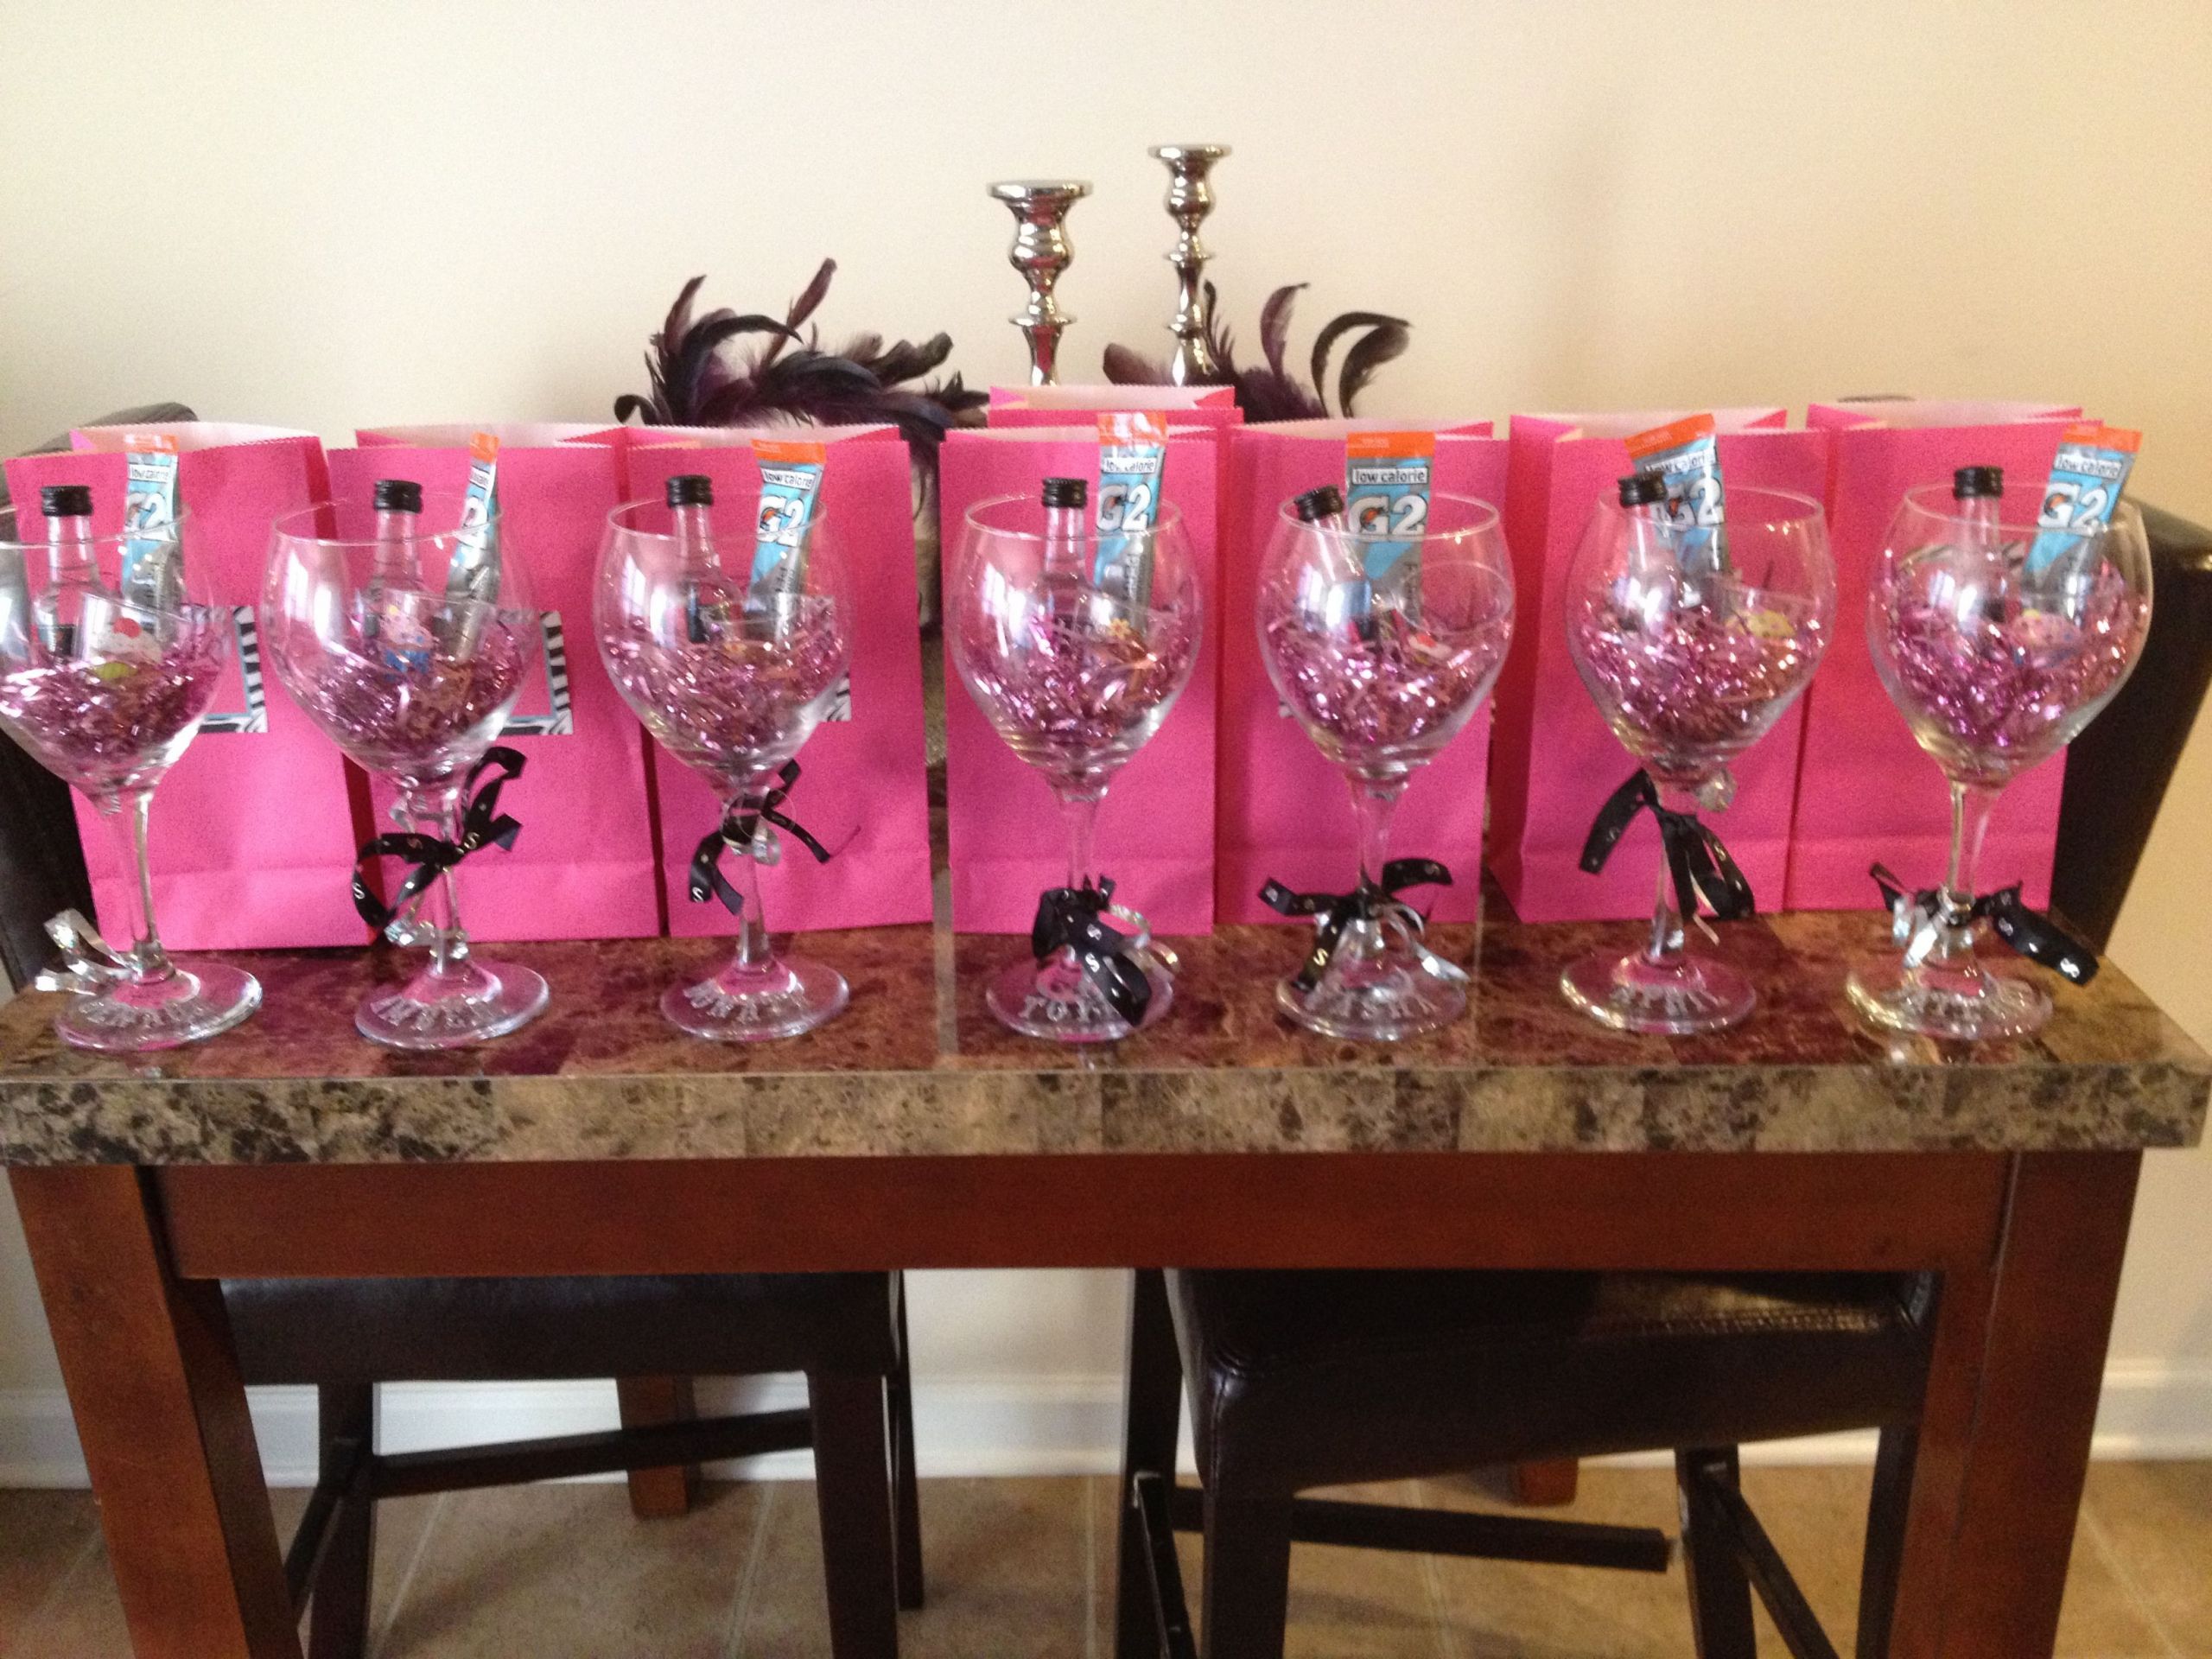 Girls Weekend Gift Ideas
 Girls Trip Gifts A wine glass with shot bottles and a